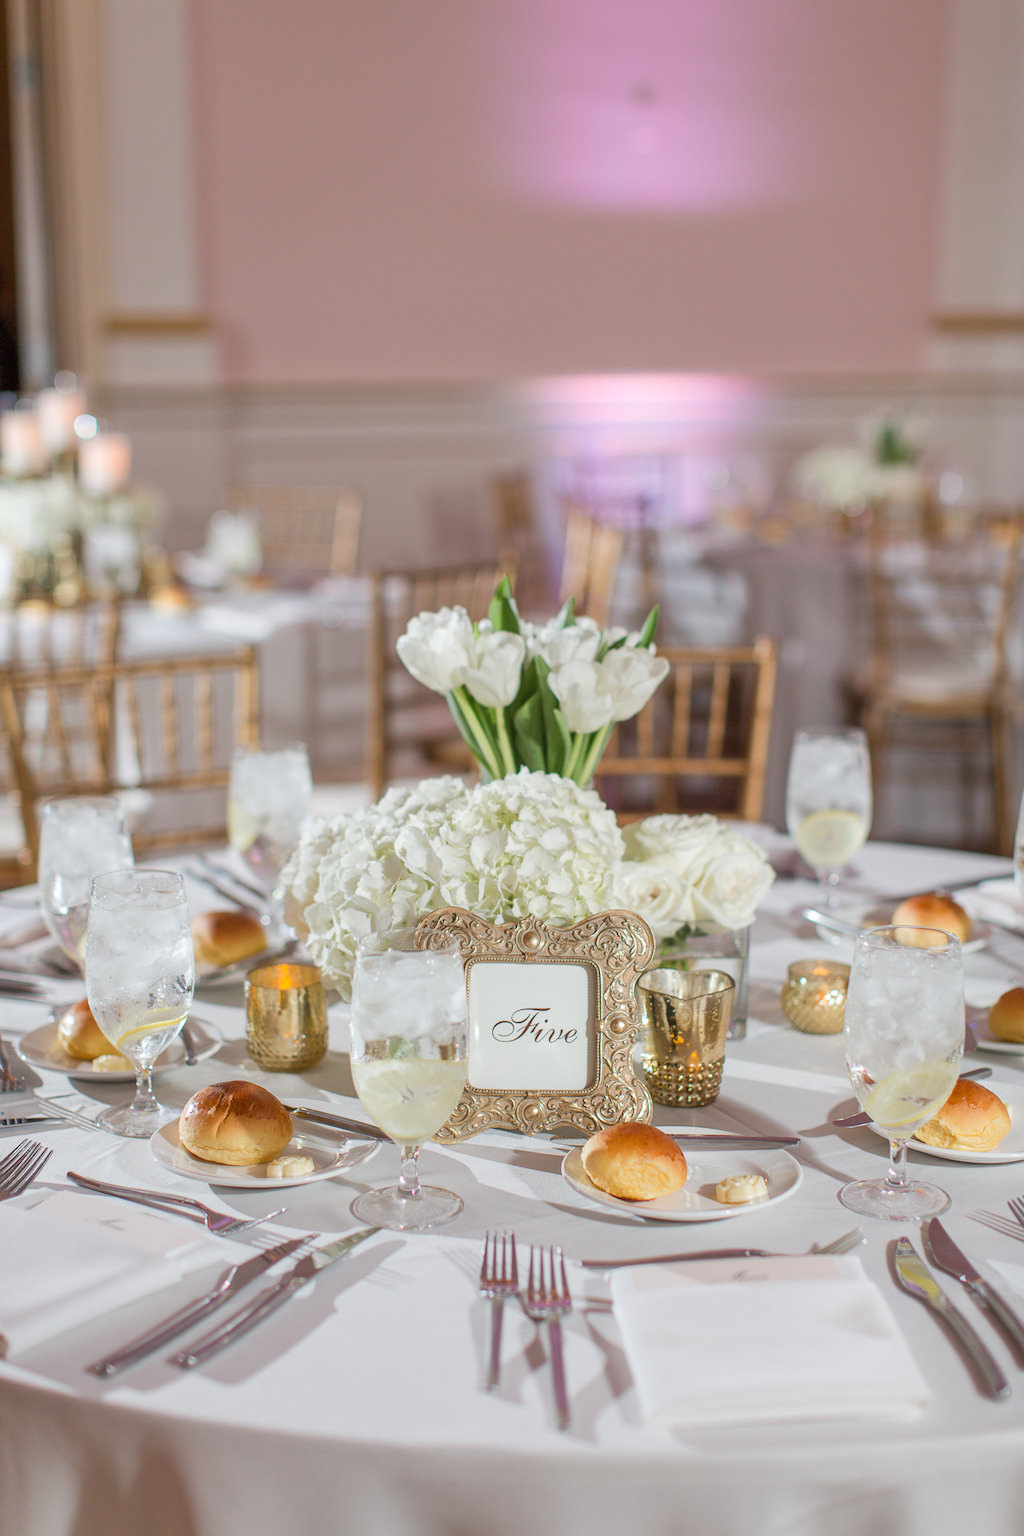 Romantic Classic Elegant Wedding Reception Decor, Round Tables with White Linens, Low White Hydrangeas and White Tulip Floral Centerpieces, Gold Frame with Table Number | Wedding Rentals and Catering by Olympia Catering